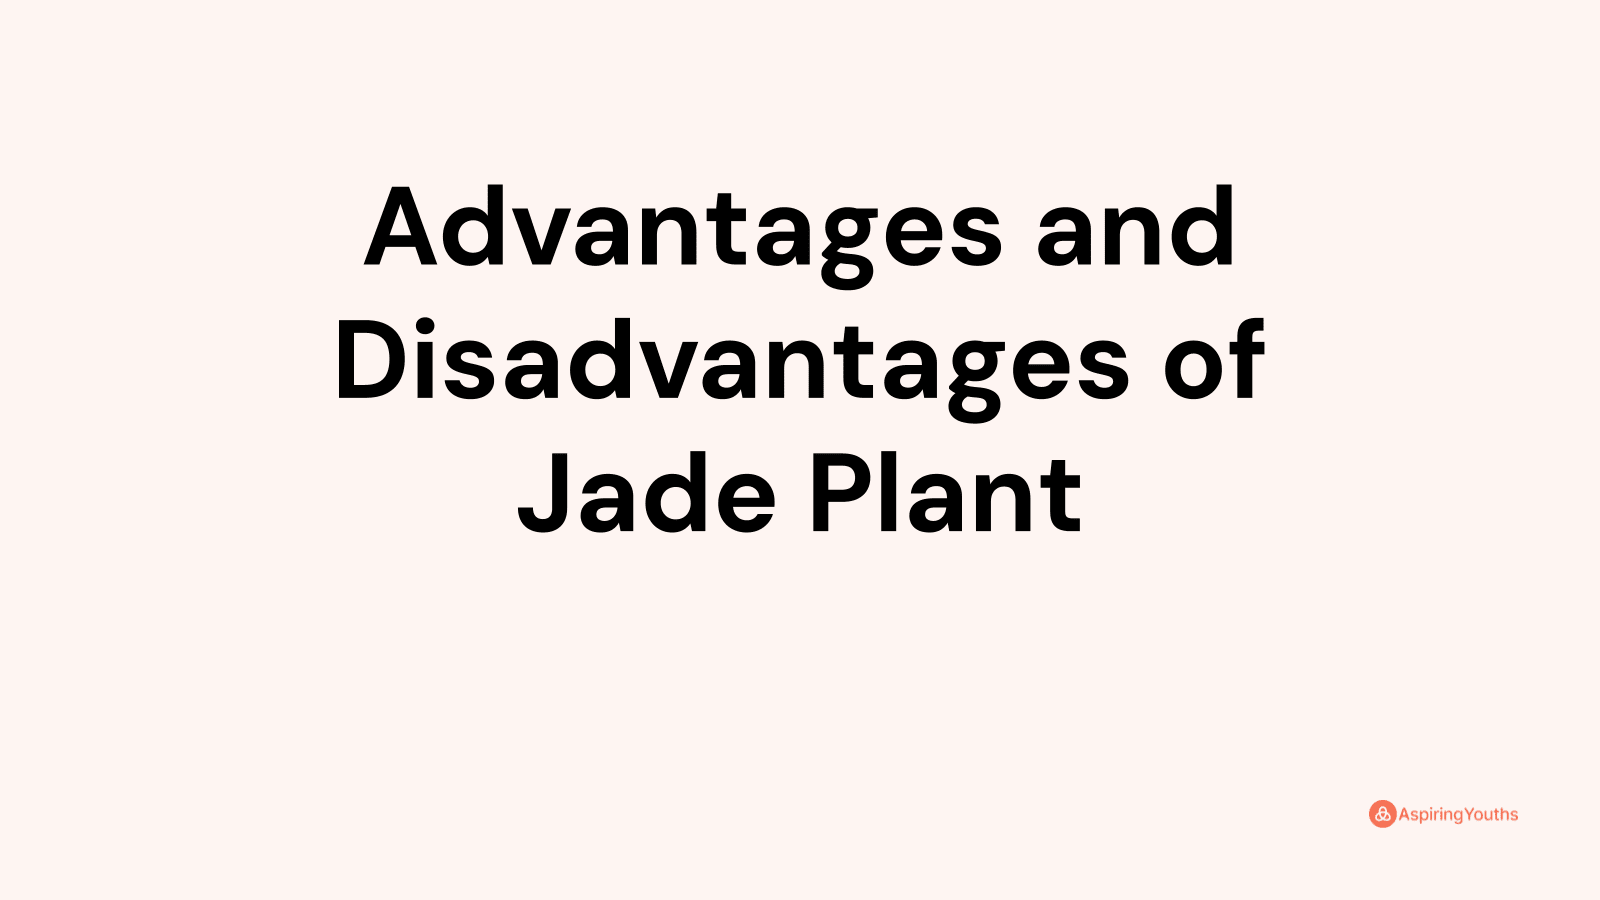 Advantages and disadvantages of Jade Plant